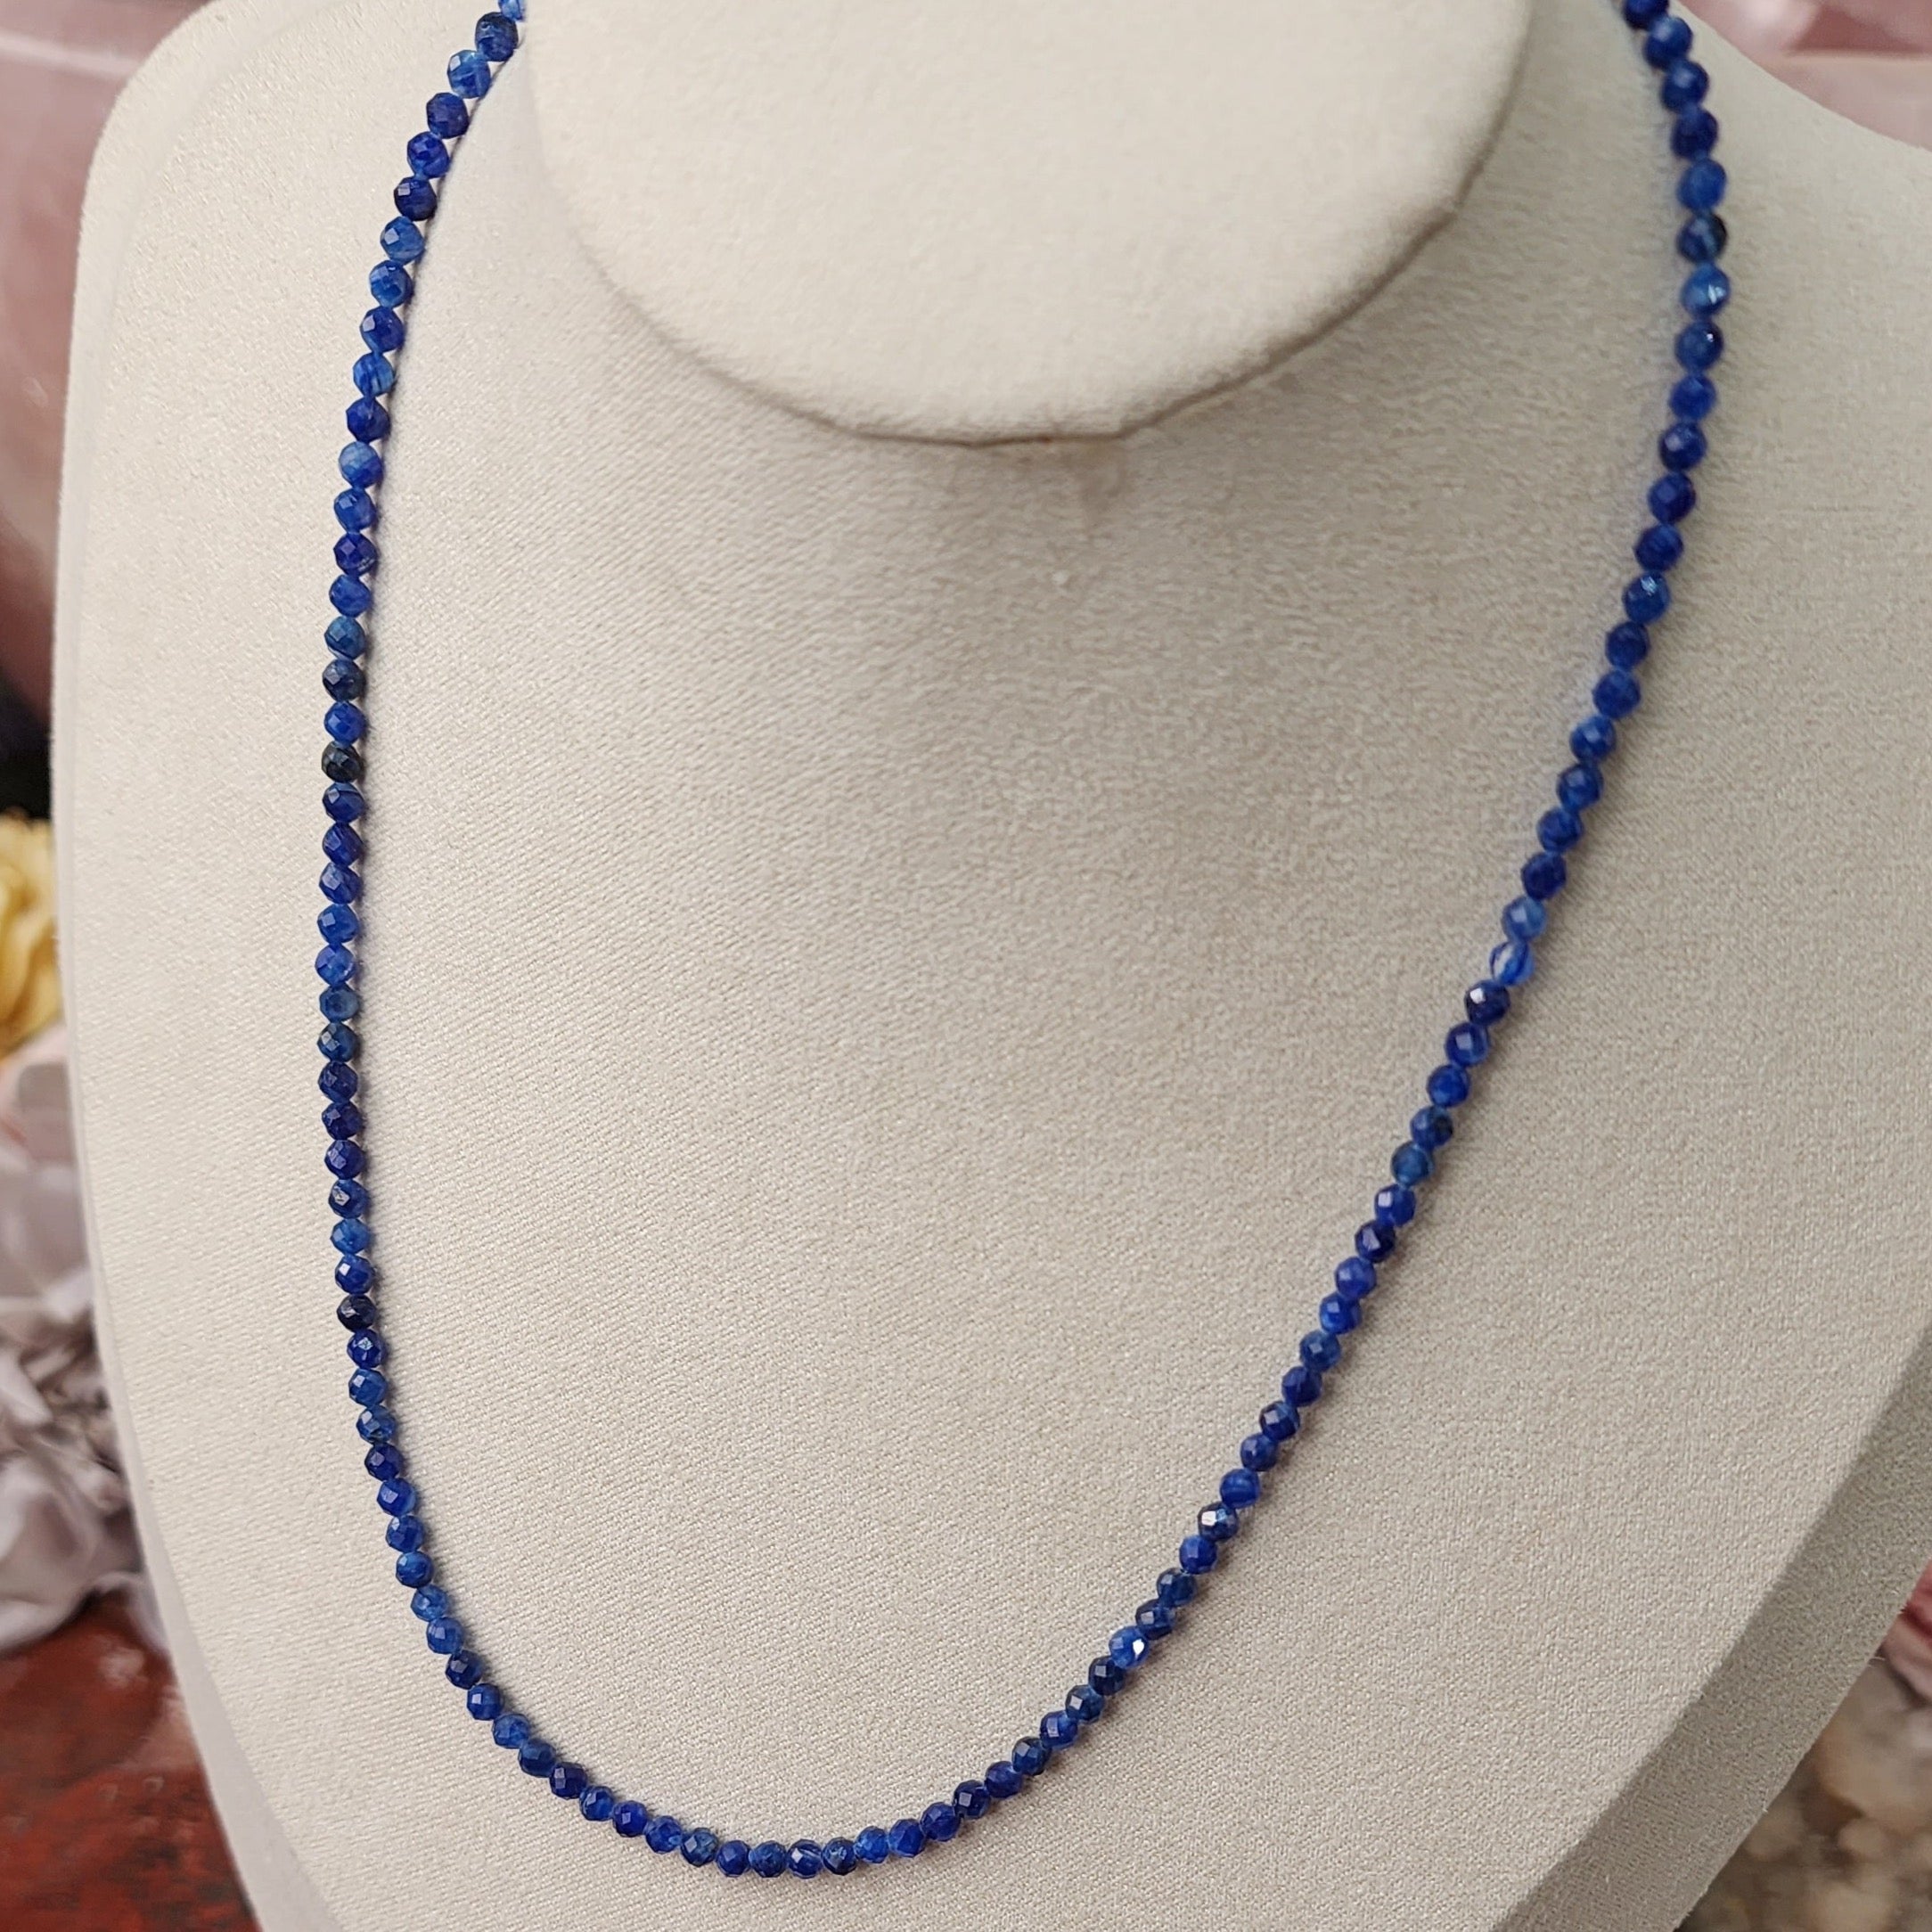 Kyanite Micro Faceted Necklace for Harmony and Overcoming Bad Habits